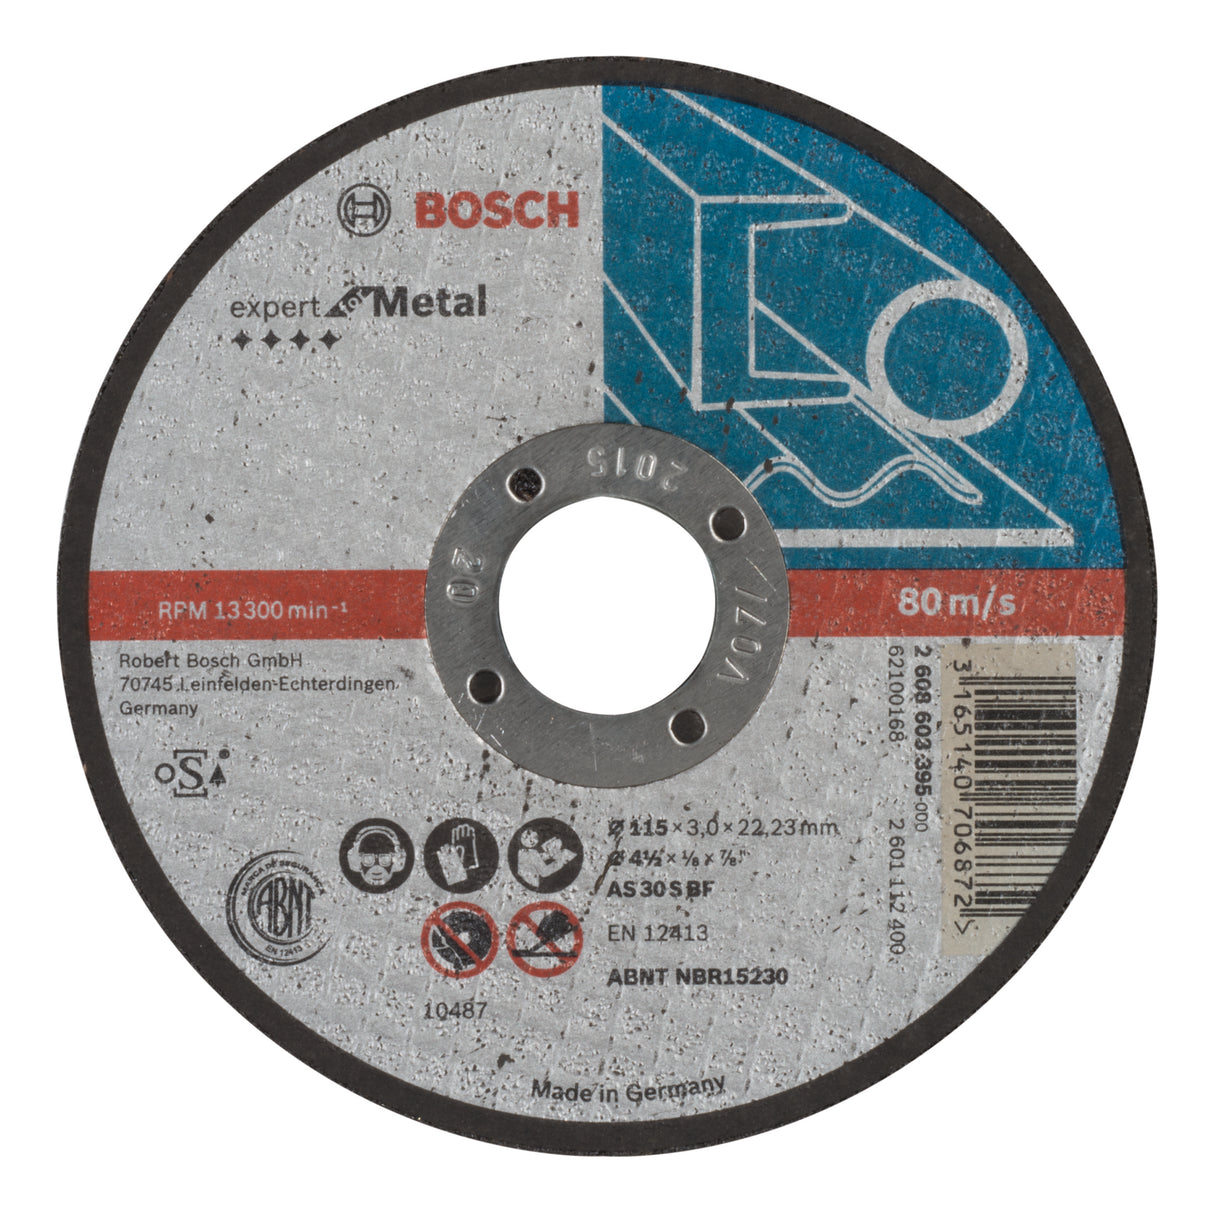 Bosch Professional Expert AS 30 S BF Metal Straight Cutting Disc - 115mm x 3.0mm